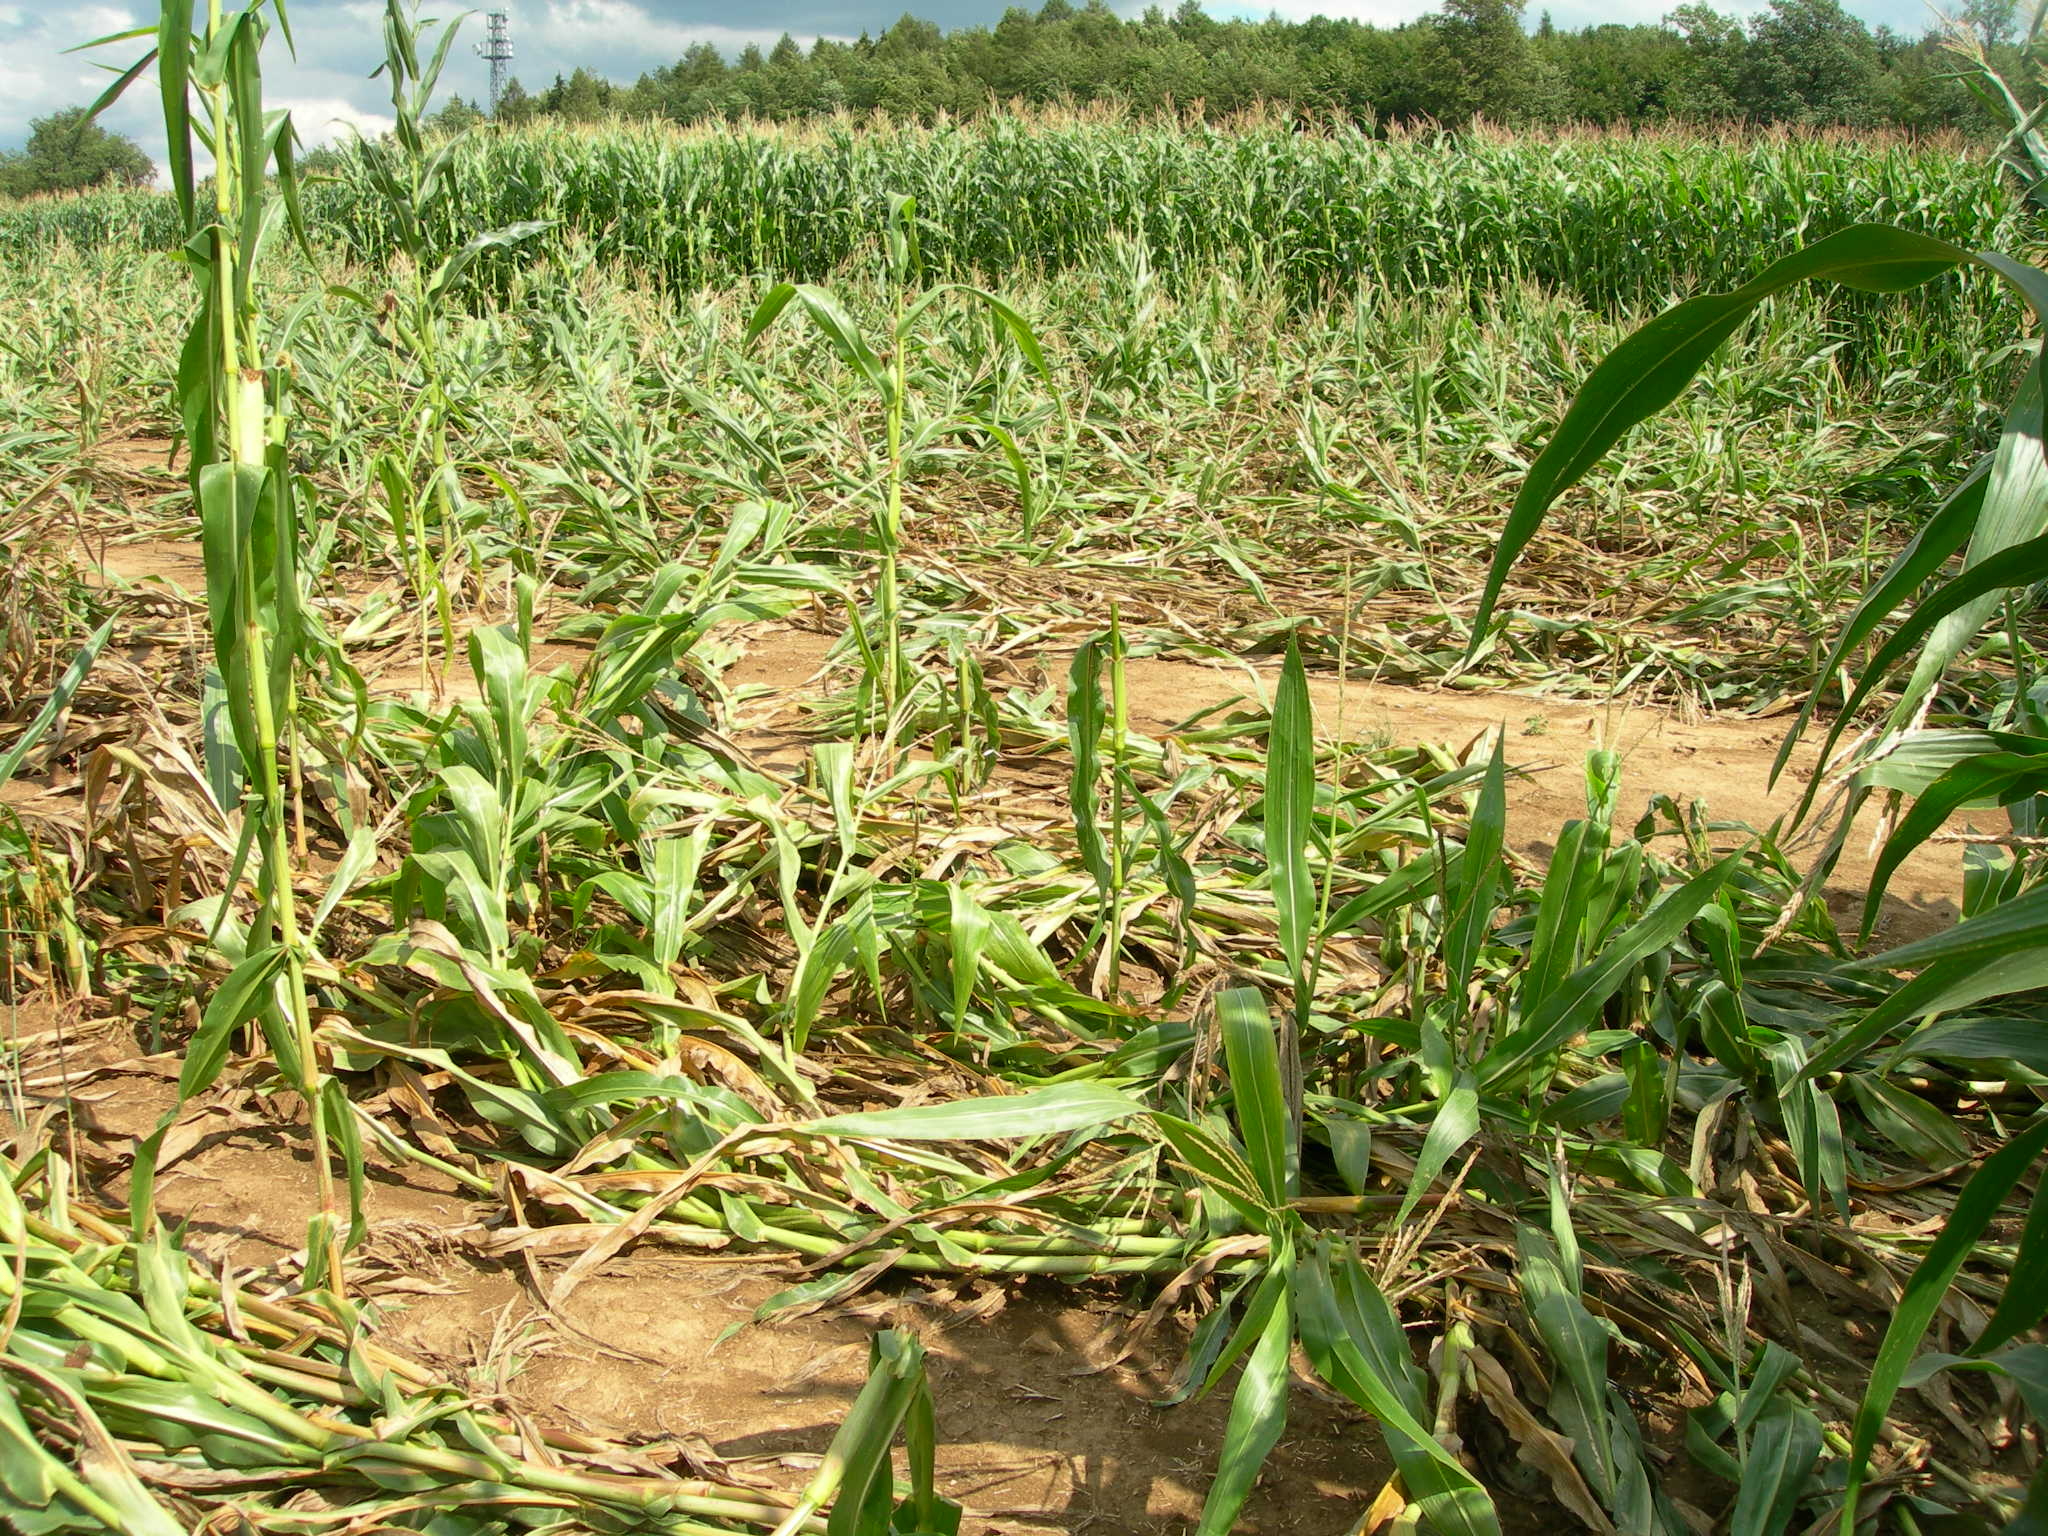 Opponents of genetic engineering have repeatedly destroyed fields with genetically modified maize.